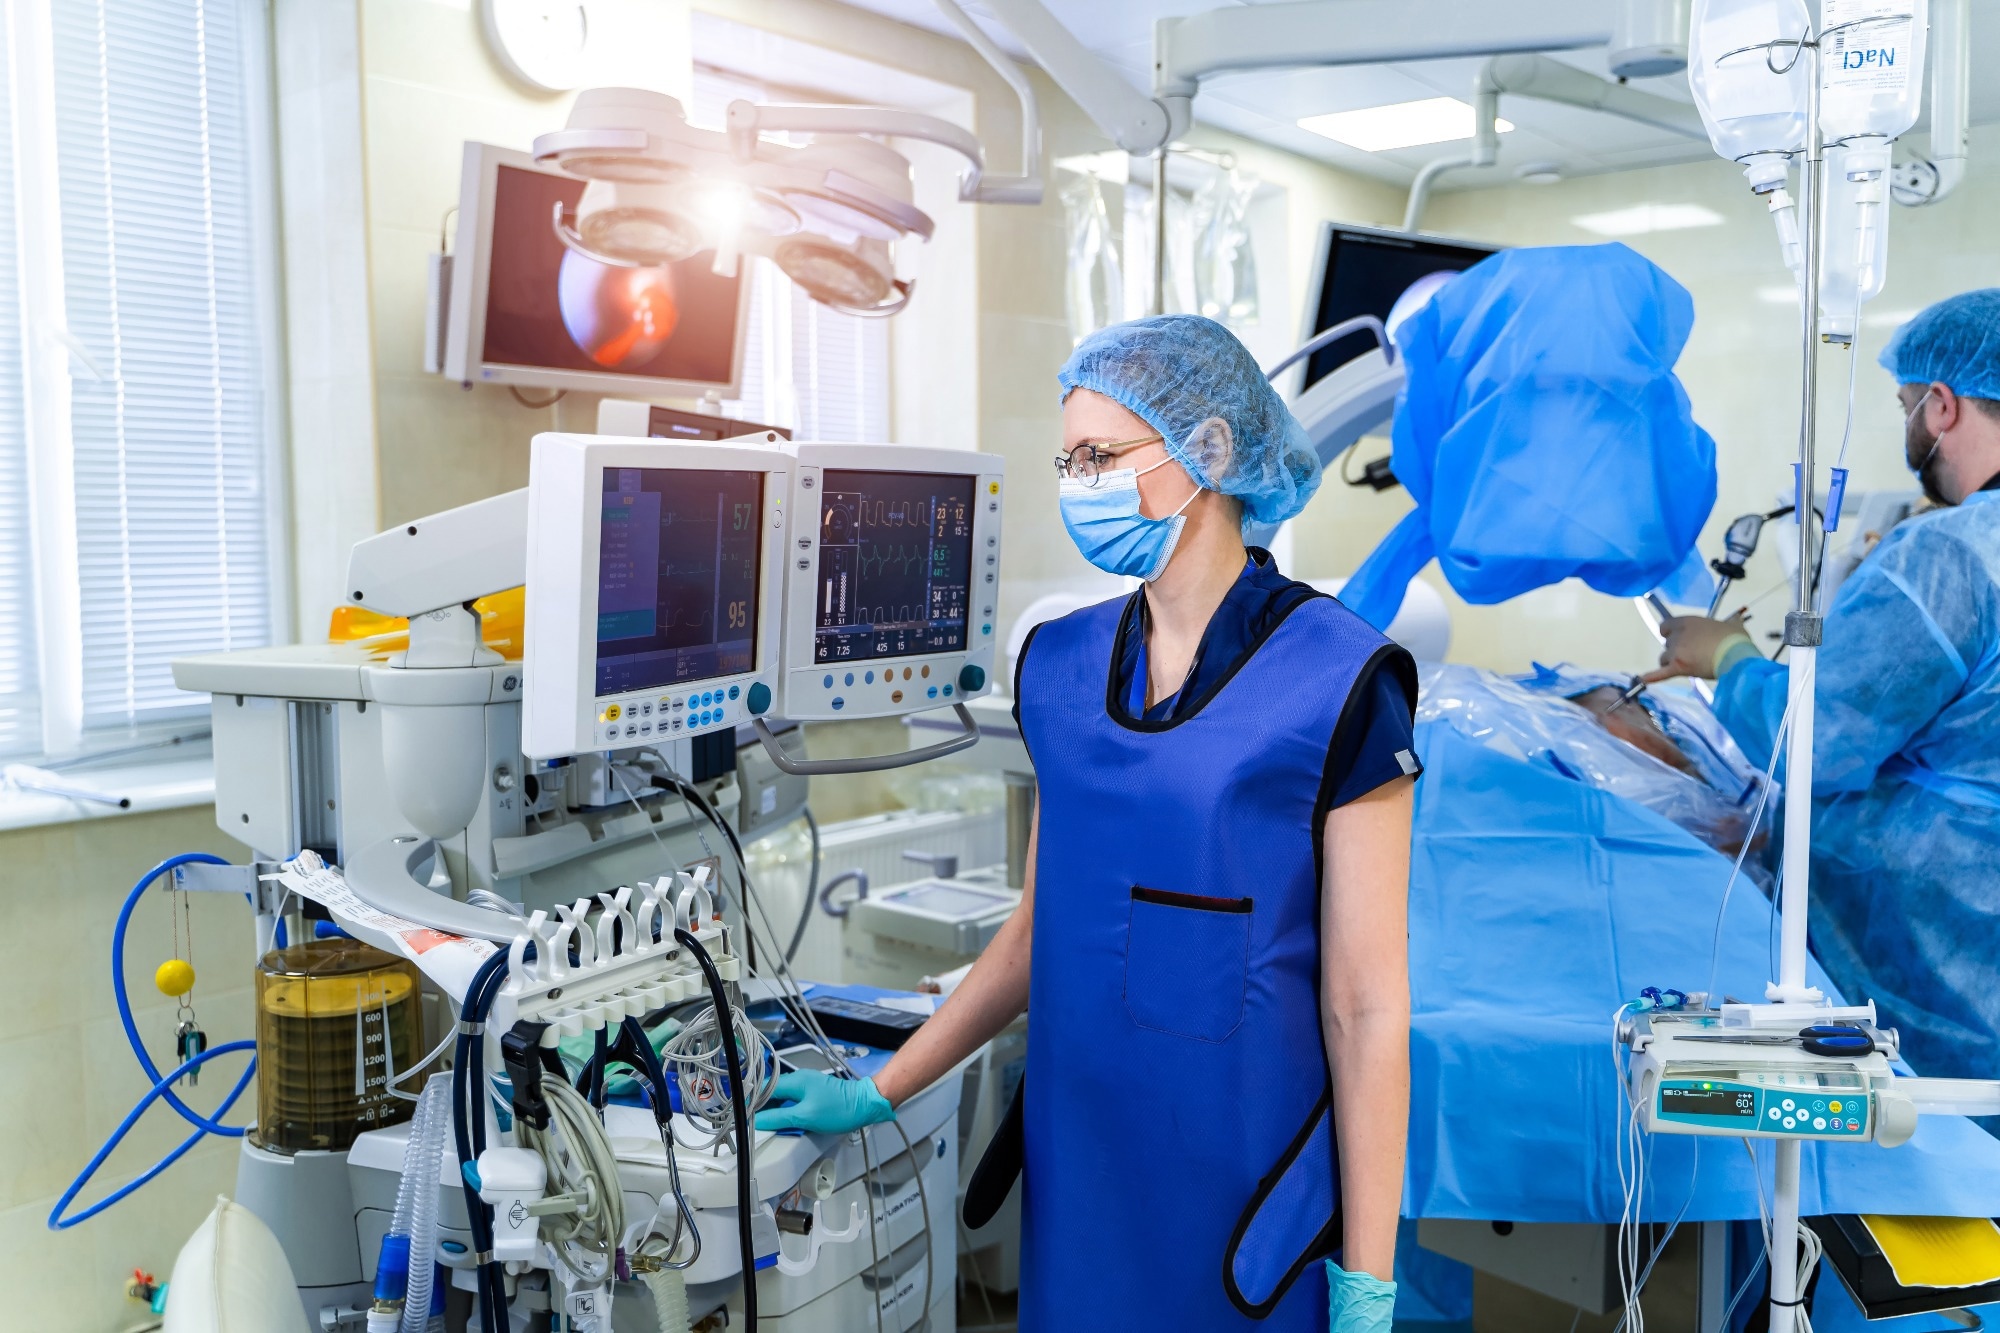 Study: Cardiac function in critically ill patients with severe COVID: A prospective cross-sectional study in mechanically ventilated patients. Image Credit: Terelyuk/Shutterstock